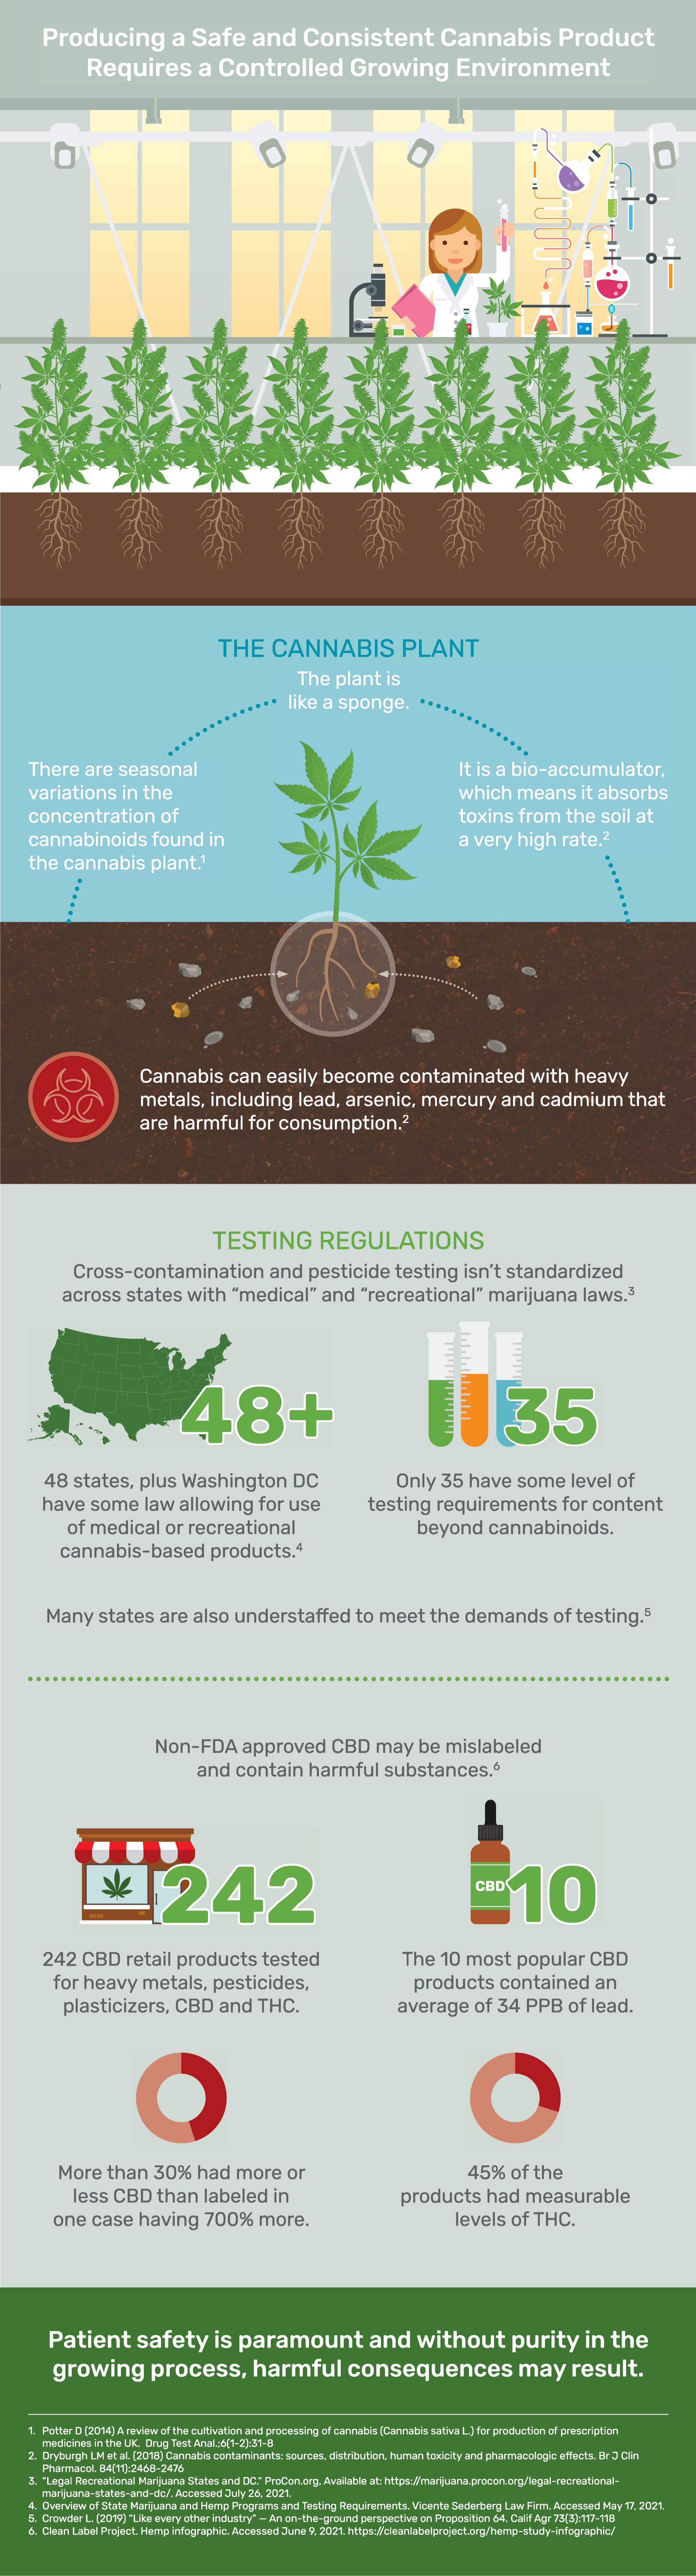 Cannabis Safety and Testing Regulations